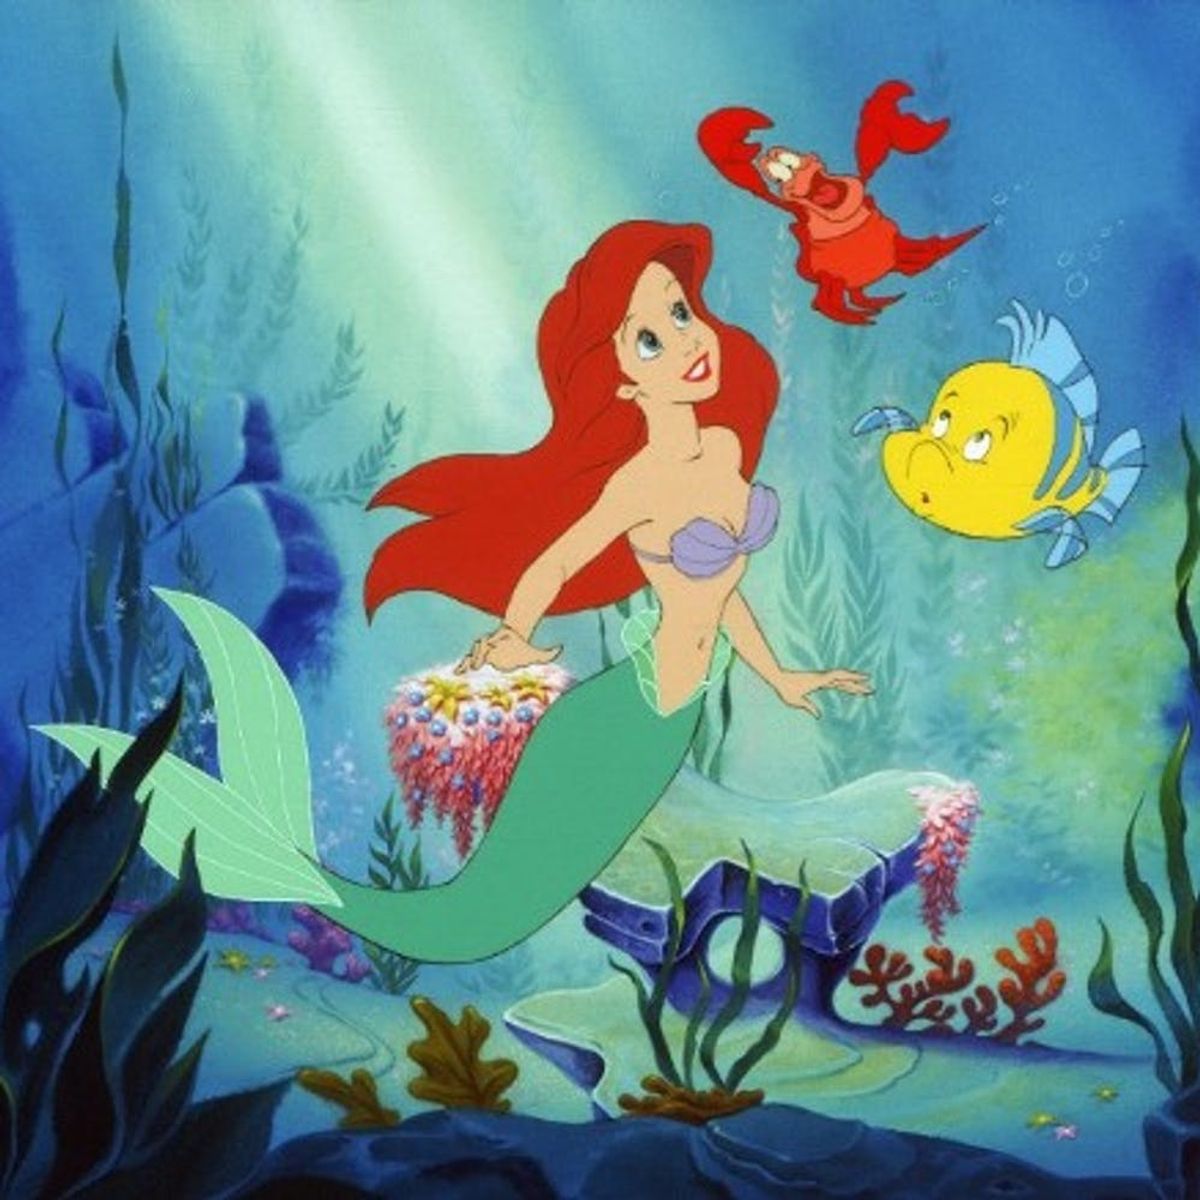 ABC Has Bad News About the Little Mermaid Live Musical